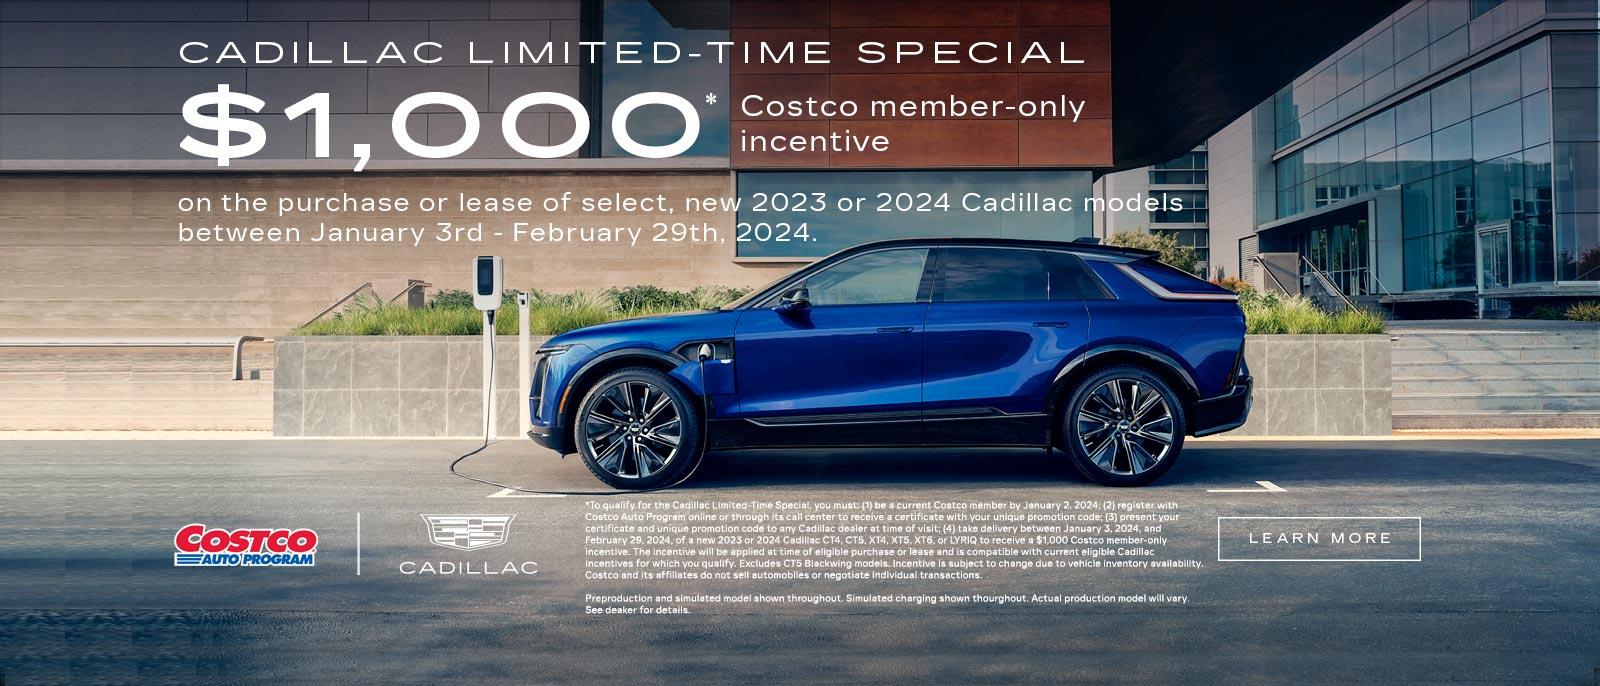 Cadillac Limited Time Special. $1,000 Costco member-only incentive. On the purchase or lease of select, new 2023 or 2024 Cadillac models between January 3rd - February 29th, 2024.